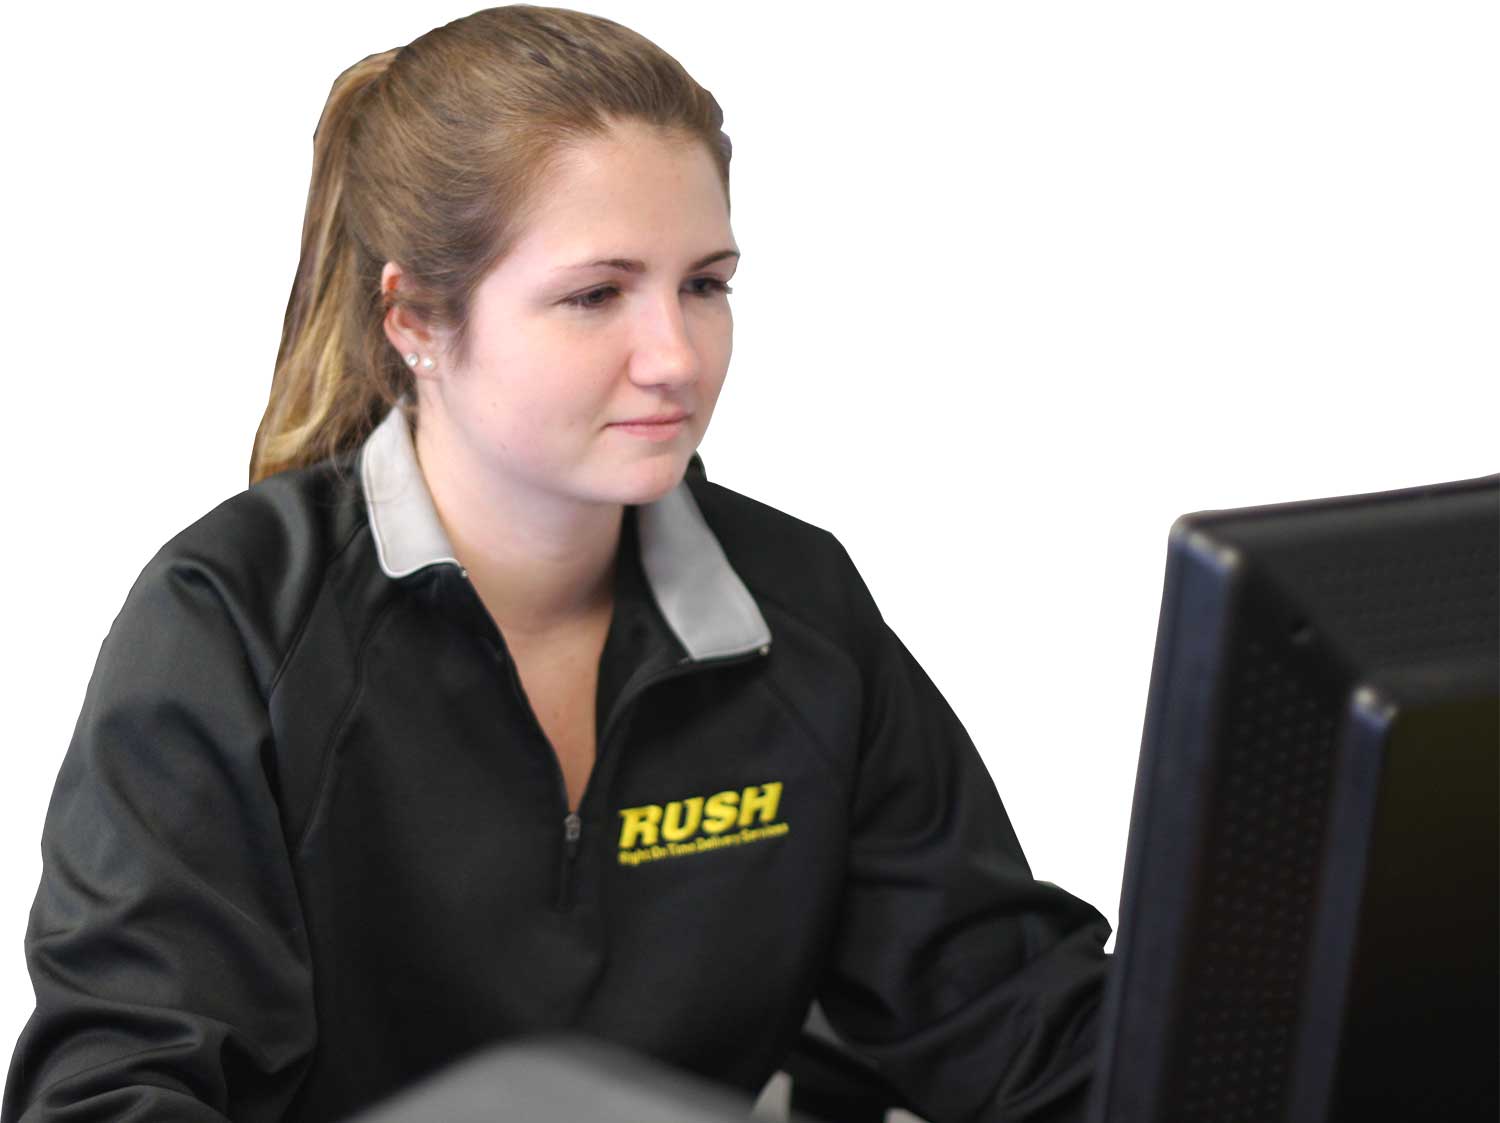 Rush Delivery - Same Day Courier Service